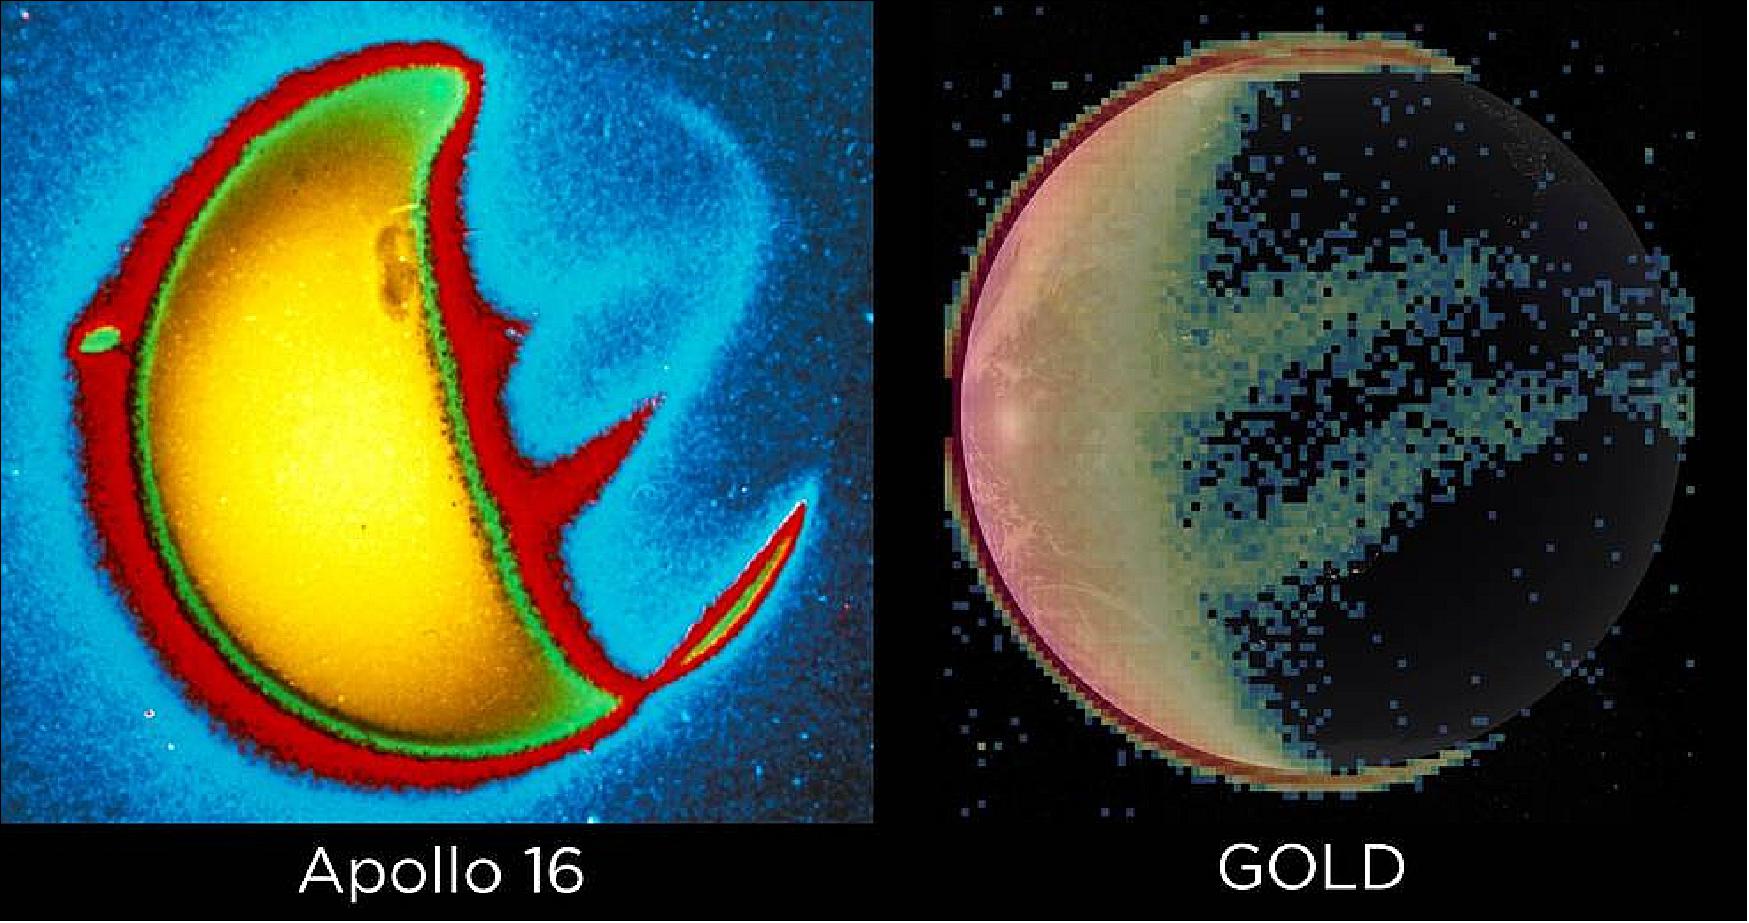 Figure 24: Compare views of Earth's shining ionosphere: the Apollo 16 photo taken in 1972 is at left, and an image from NASA's GOLD data visualization is at right. The perspectives differ slightly because while the Apollo photo was taken from the Moon's surface, GOLD images Earth's ionosphere from geostationary orbit ( image credit: Apollo image: G. Carruthers (NRL) et al./Far UV Camera/NASA/Apollo 16; GOLD image: NASA/GOLD/Scientific Visualization Studio/Tom Bridgman/Joy Ng)